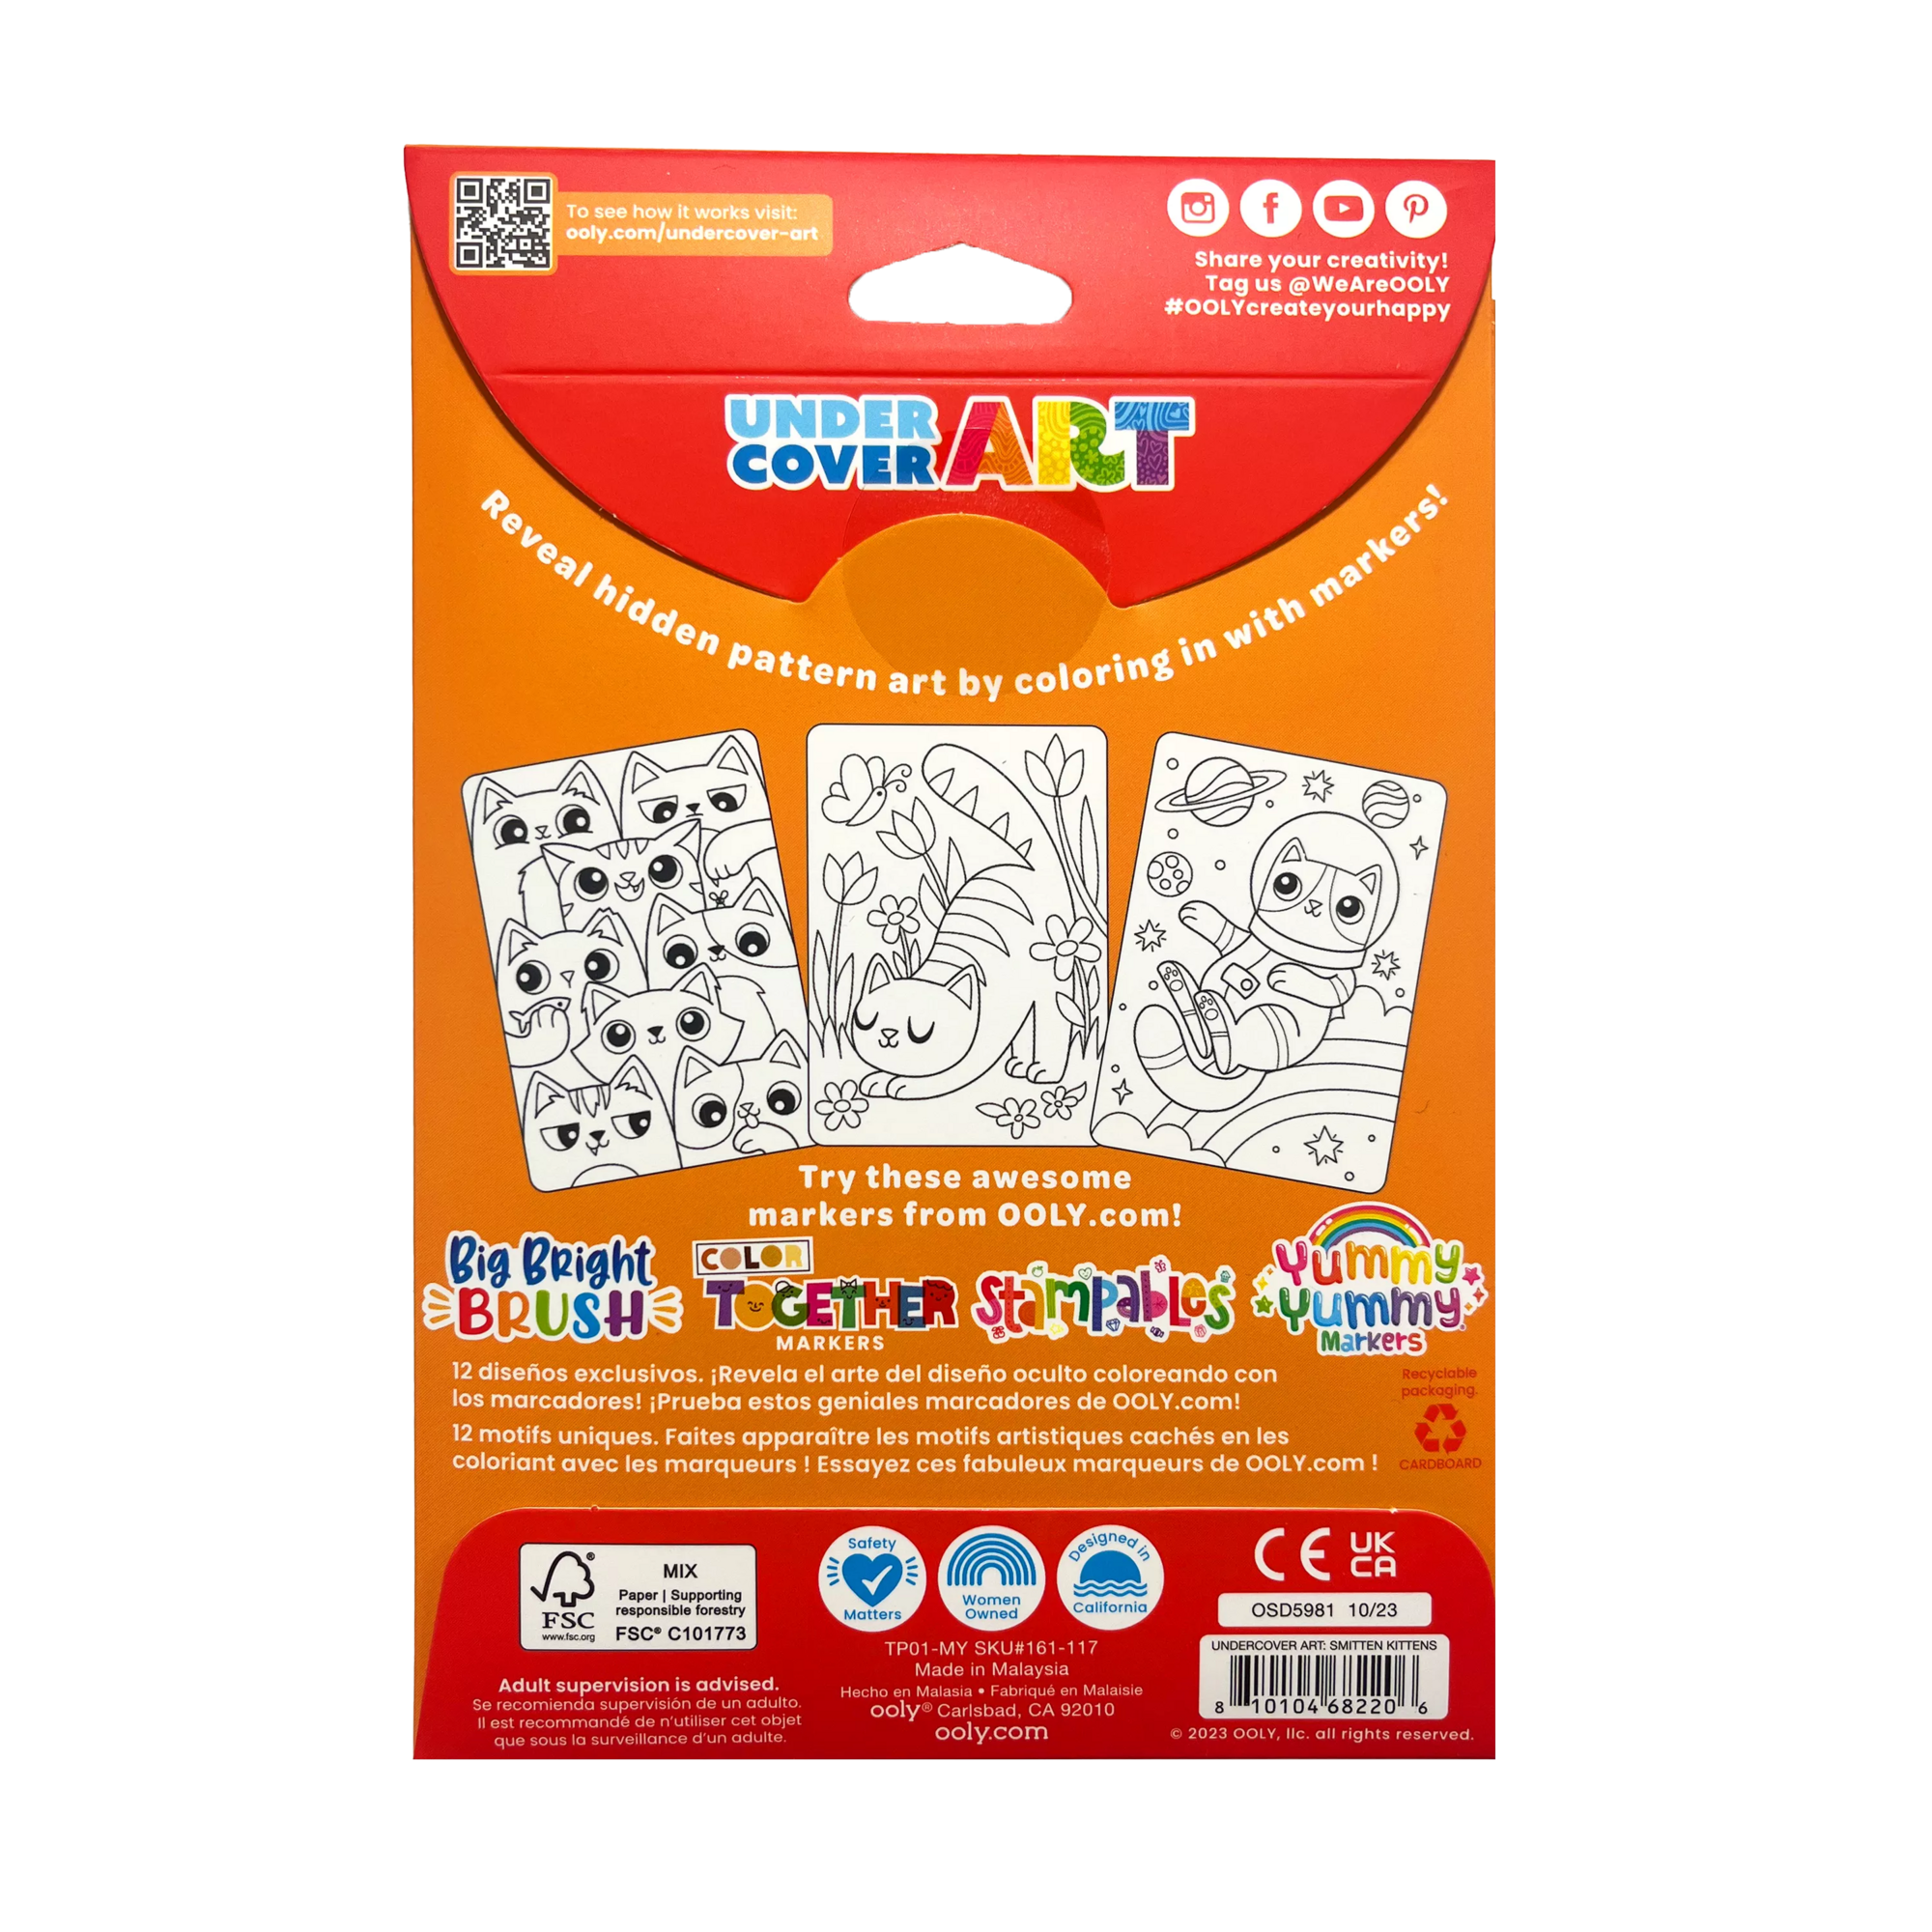 OOLY Undercover Art Hidden Pattern Coloring Activity Art Cards - Smitten Kittens back of packaging